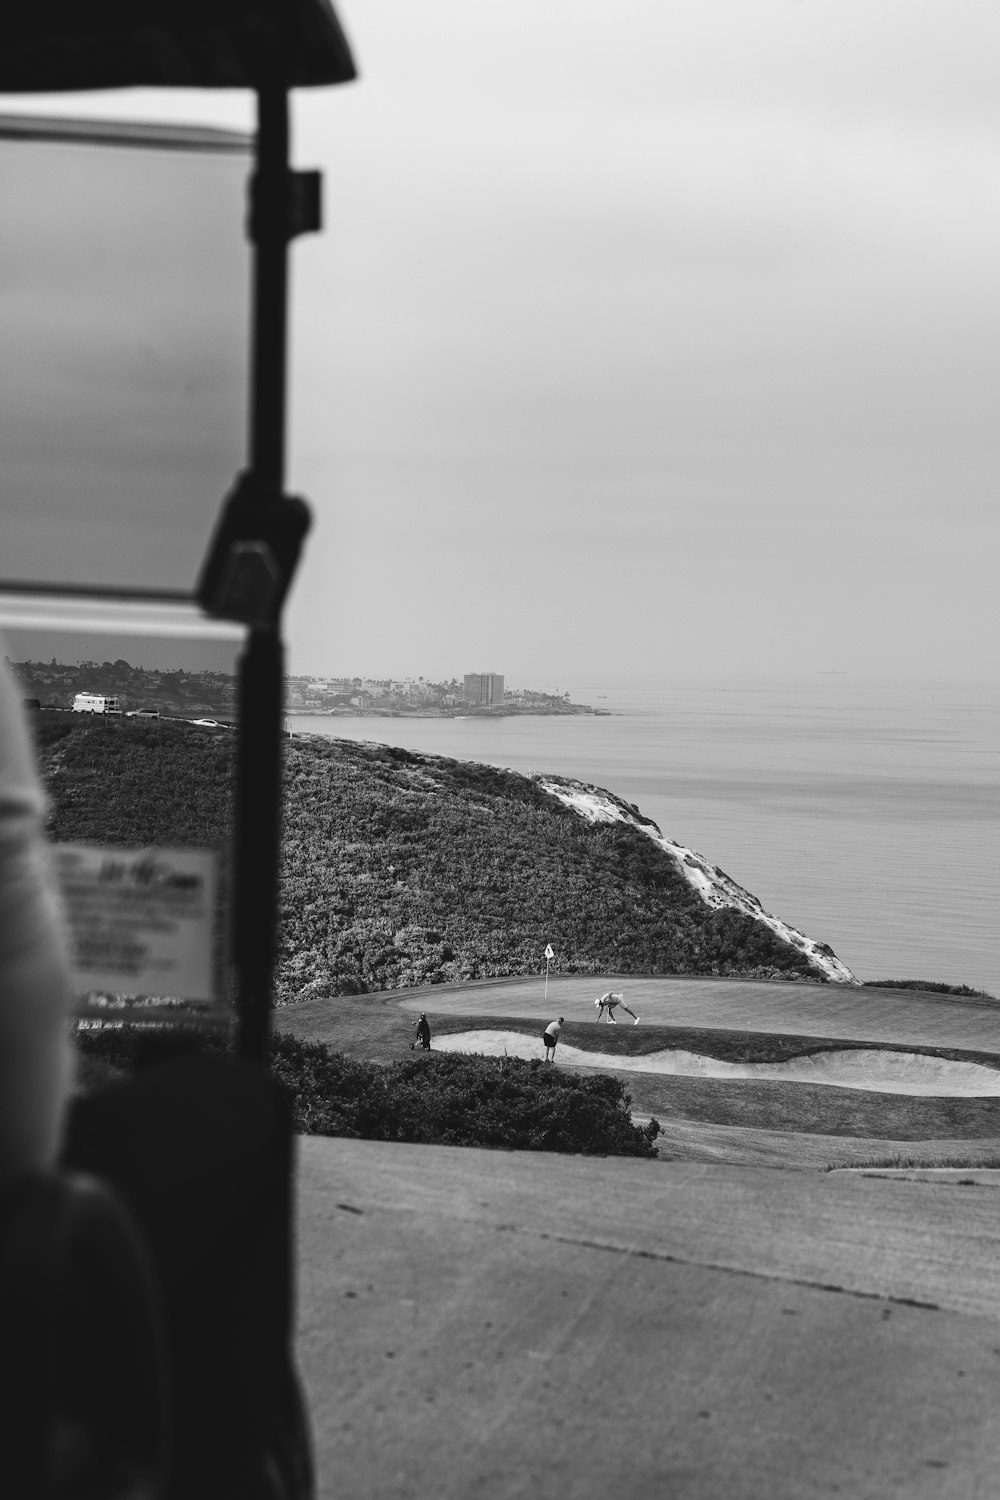 a view of the ocean from inside a bus